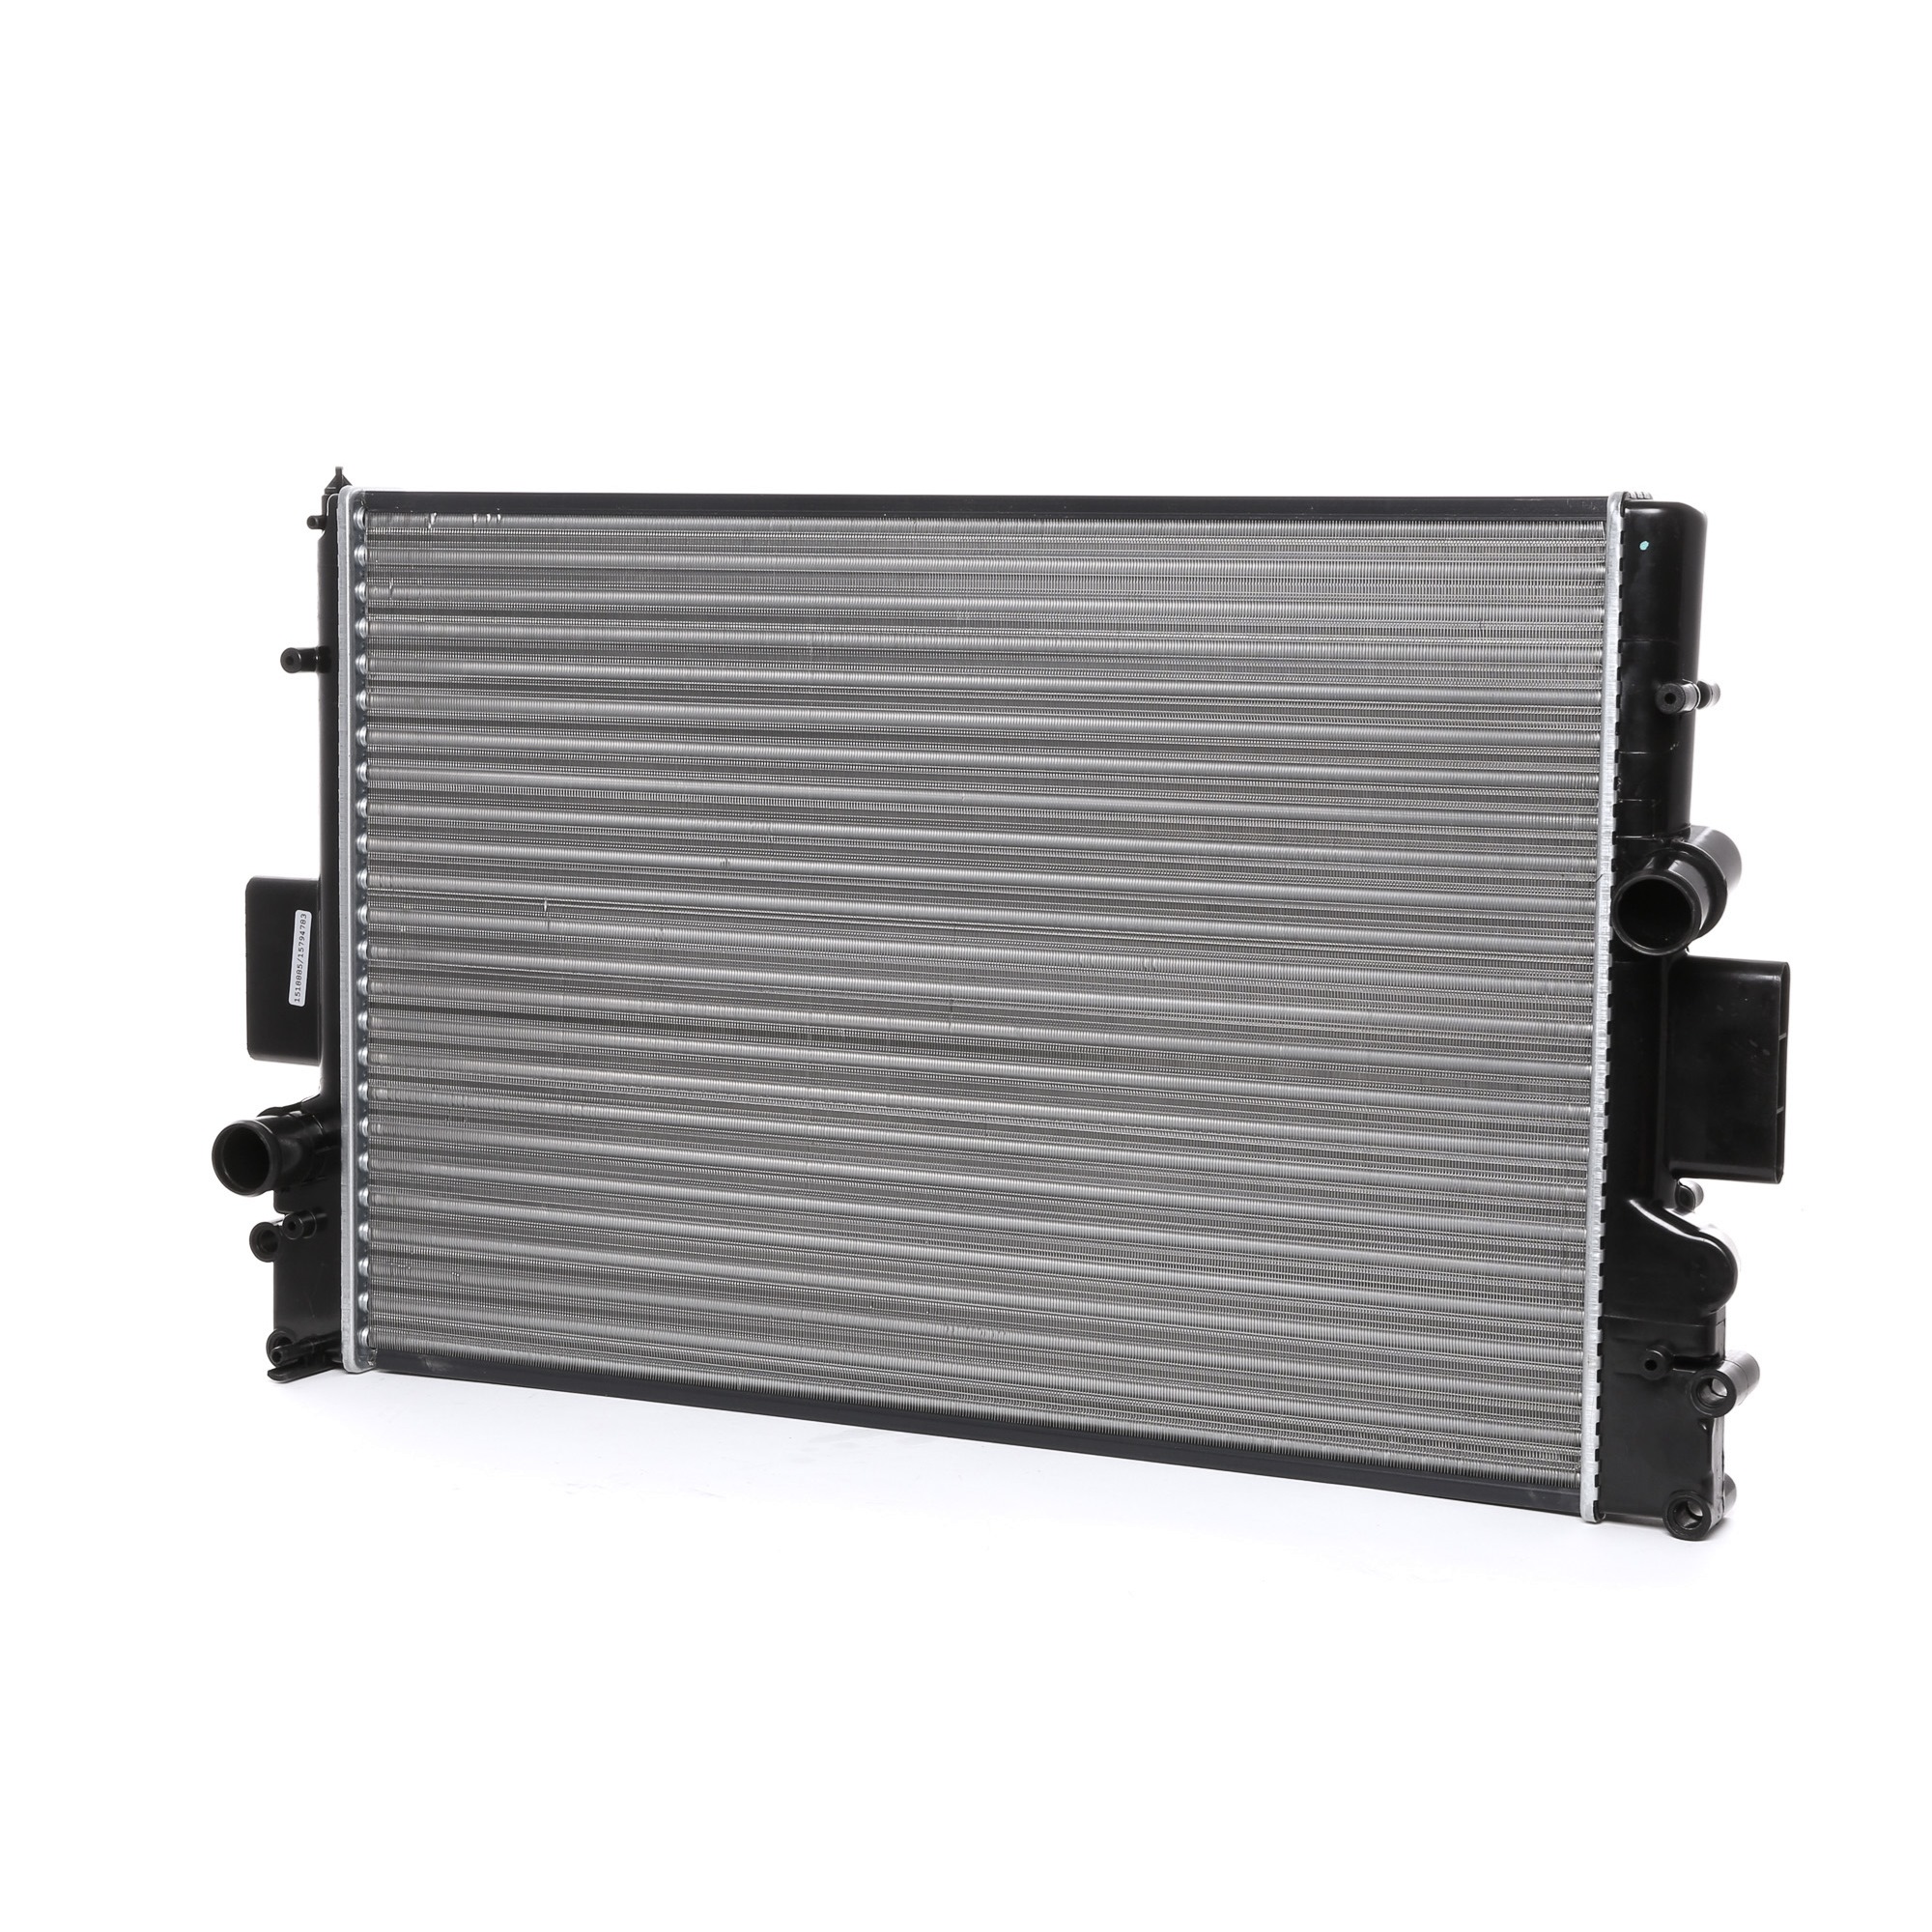 RIDEX Aluminium, Mechanically jointed cooling fins Radiator 470R0924 buy